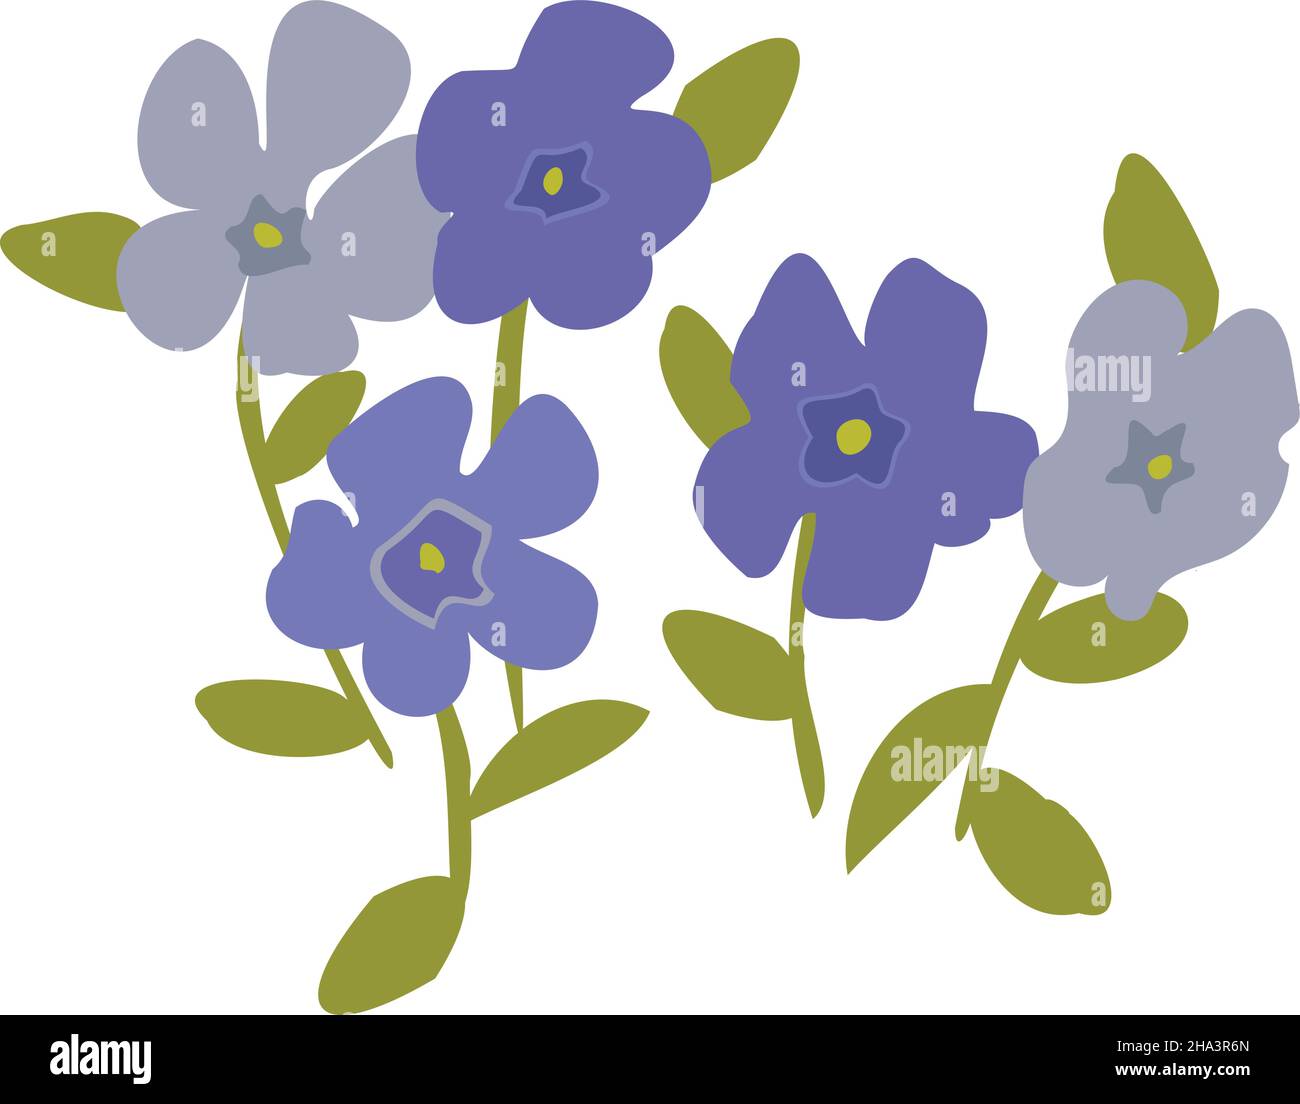 A few periwinkle flower group vector illustration Stock Vector